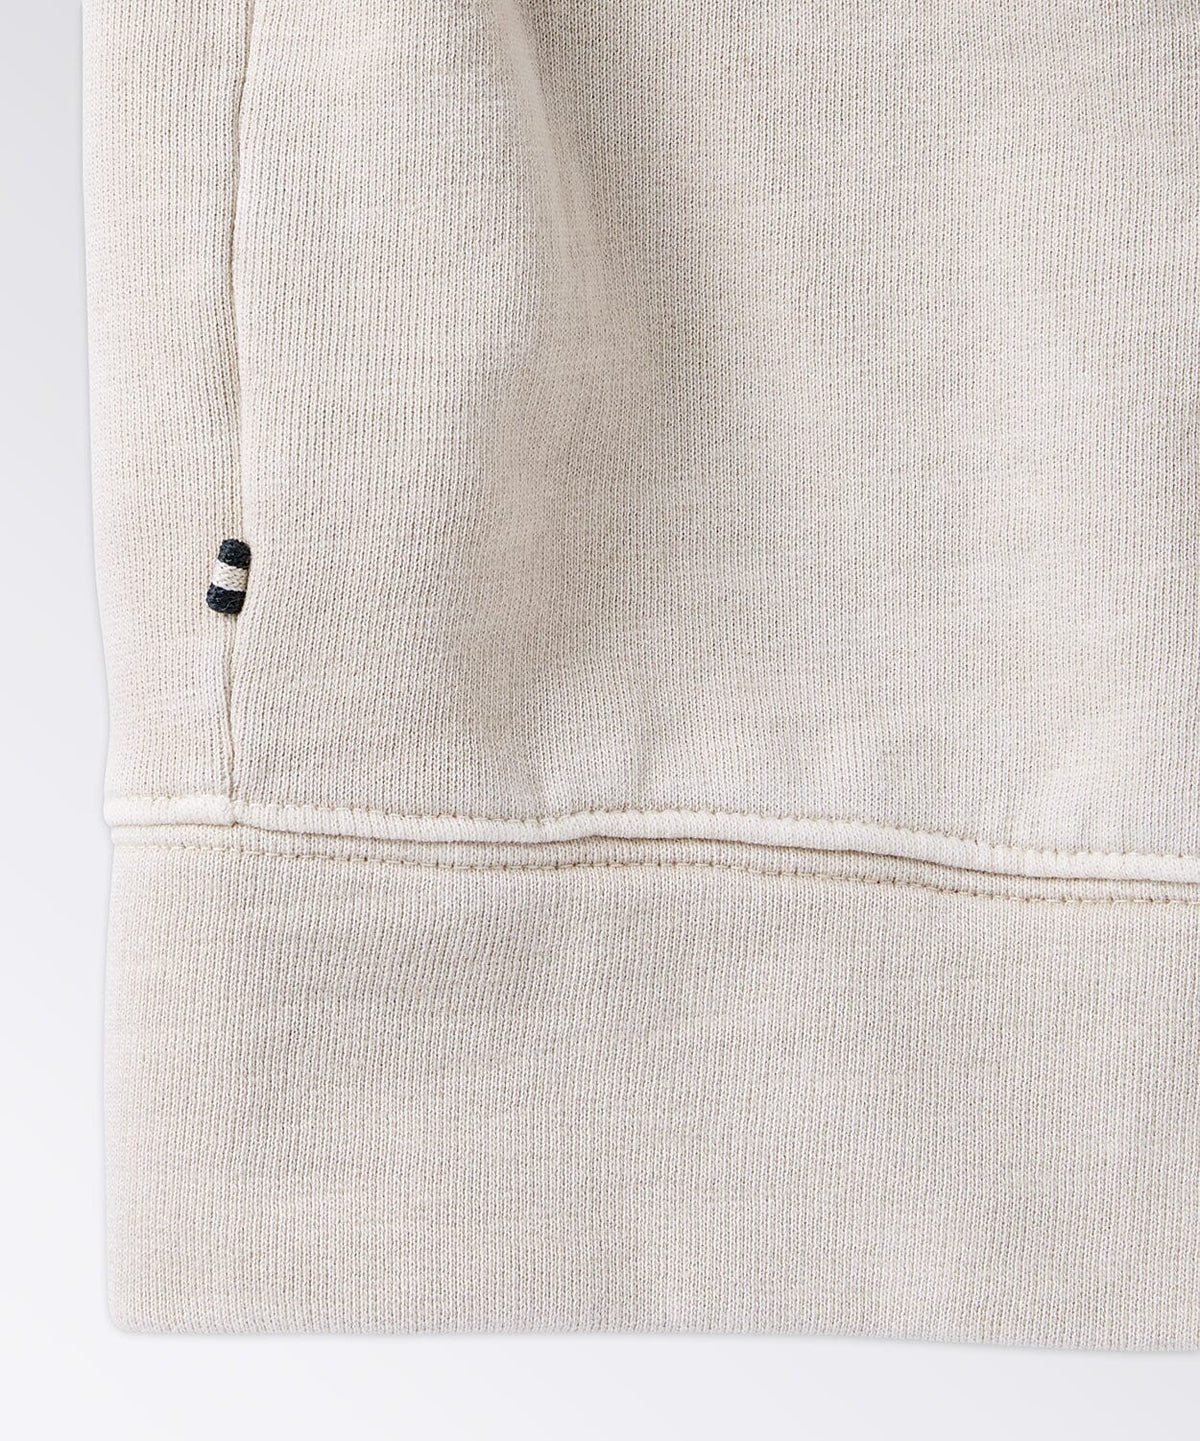 detail of a mens cardigan sweater